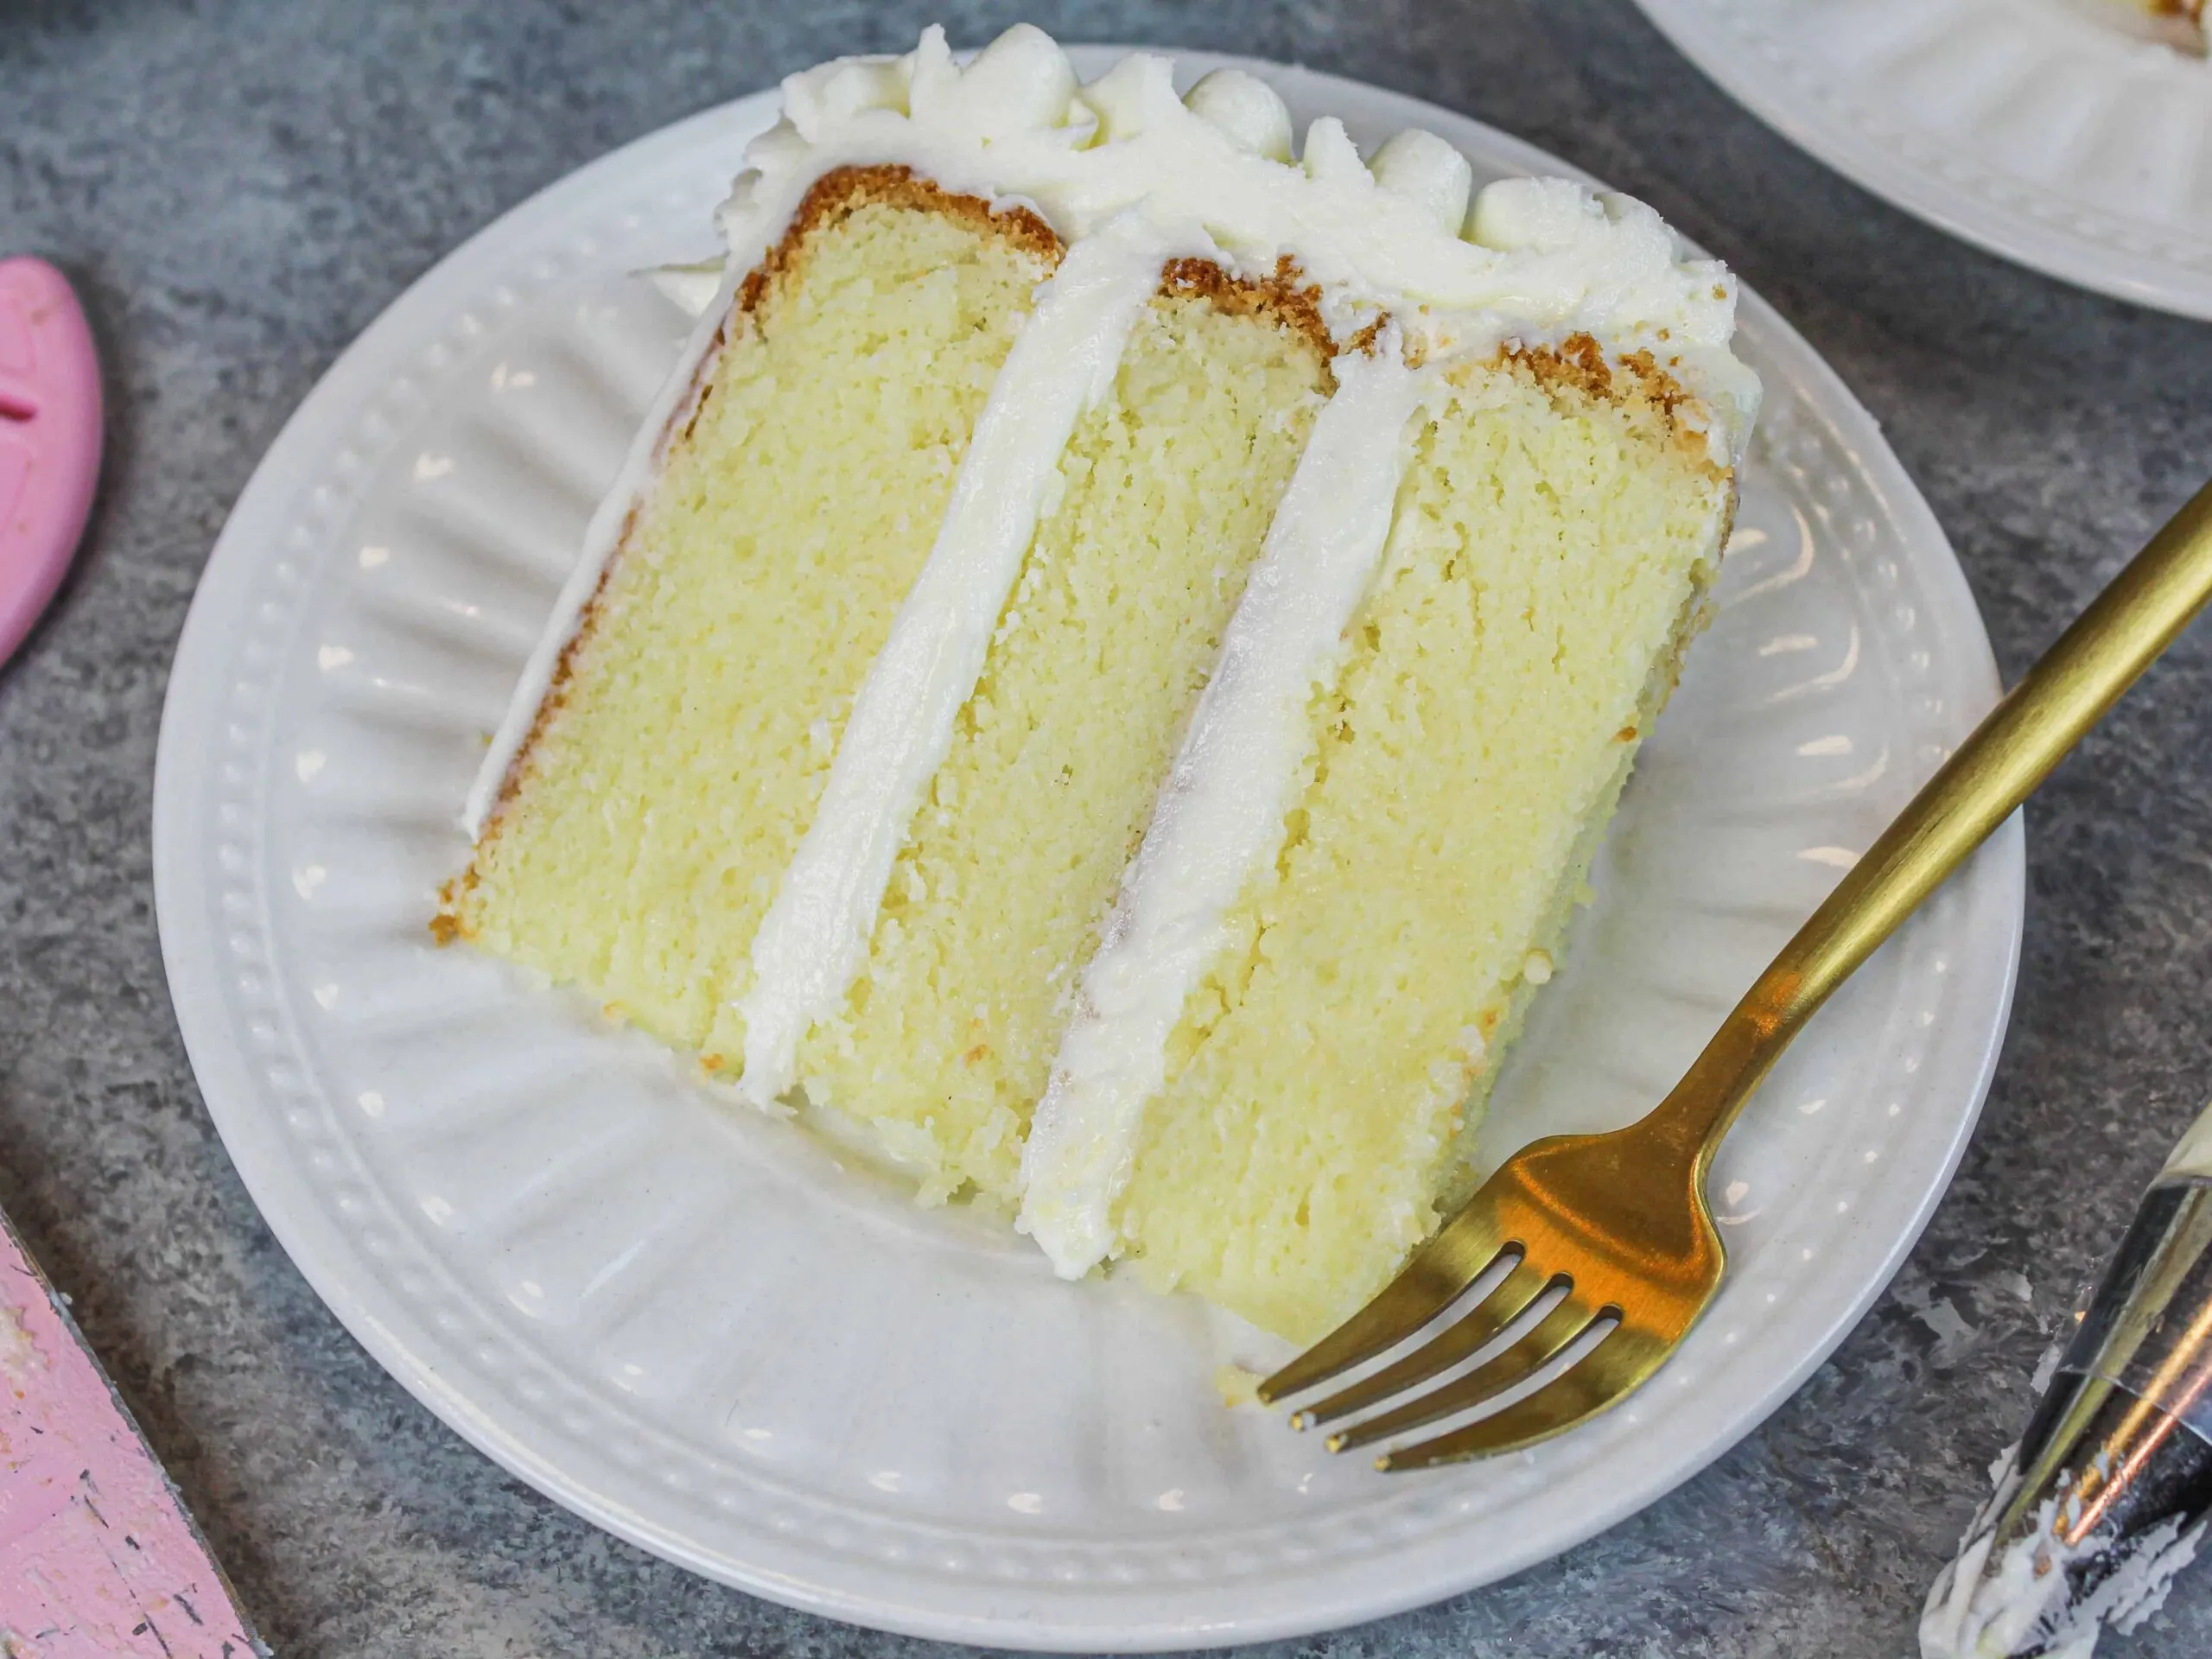 https://chelsweets.com/wp-content/uploads/2022/02/cake-slice-with-fork-down-edited-scaled.jpg.webp